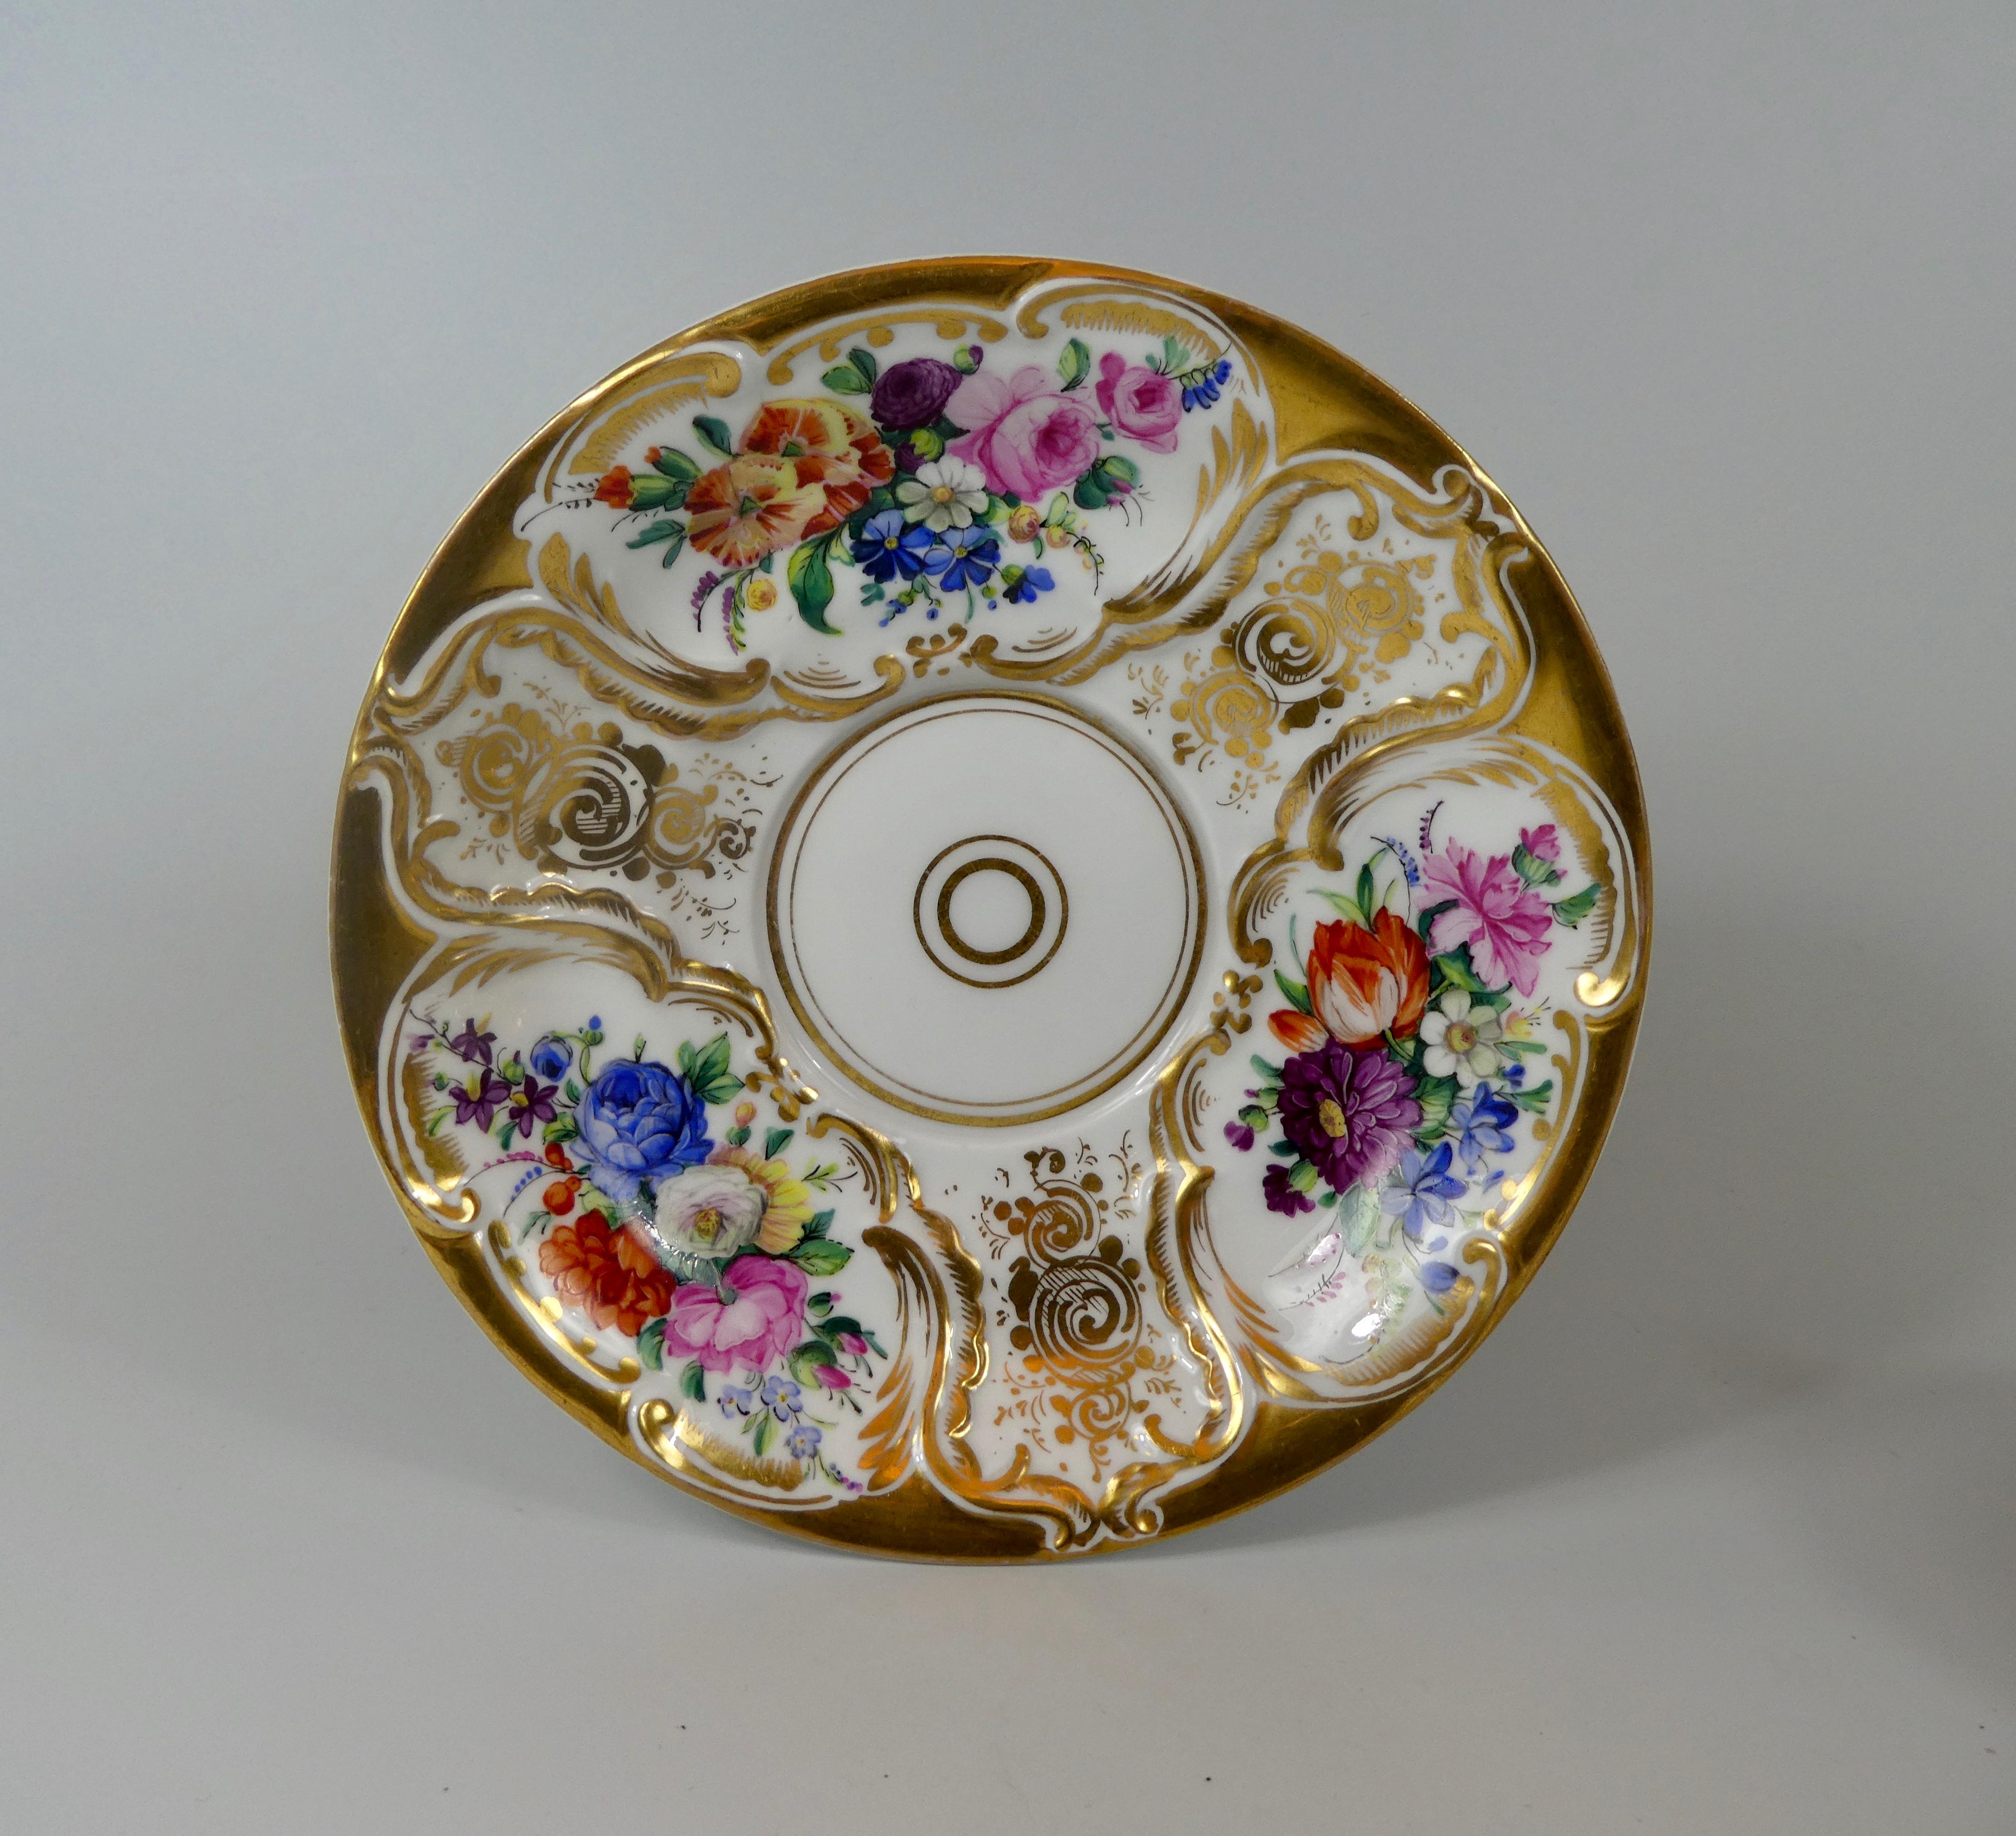 A fine KPM Berlin porcelain chocolate cup, cover and stand, circa 1860. The shaped and highly gilded cup, with moulded scroll panels containing hand painted sprays of flowers. Having an elaborate ‘C’ scroll handle. The stand and cover similarly